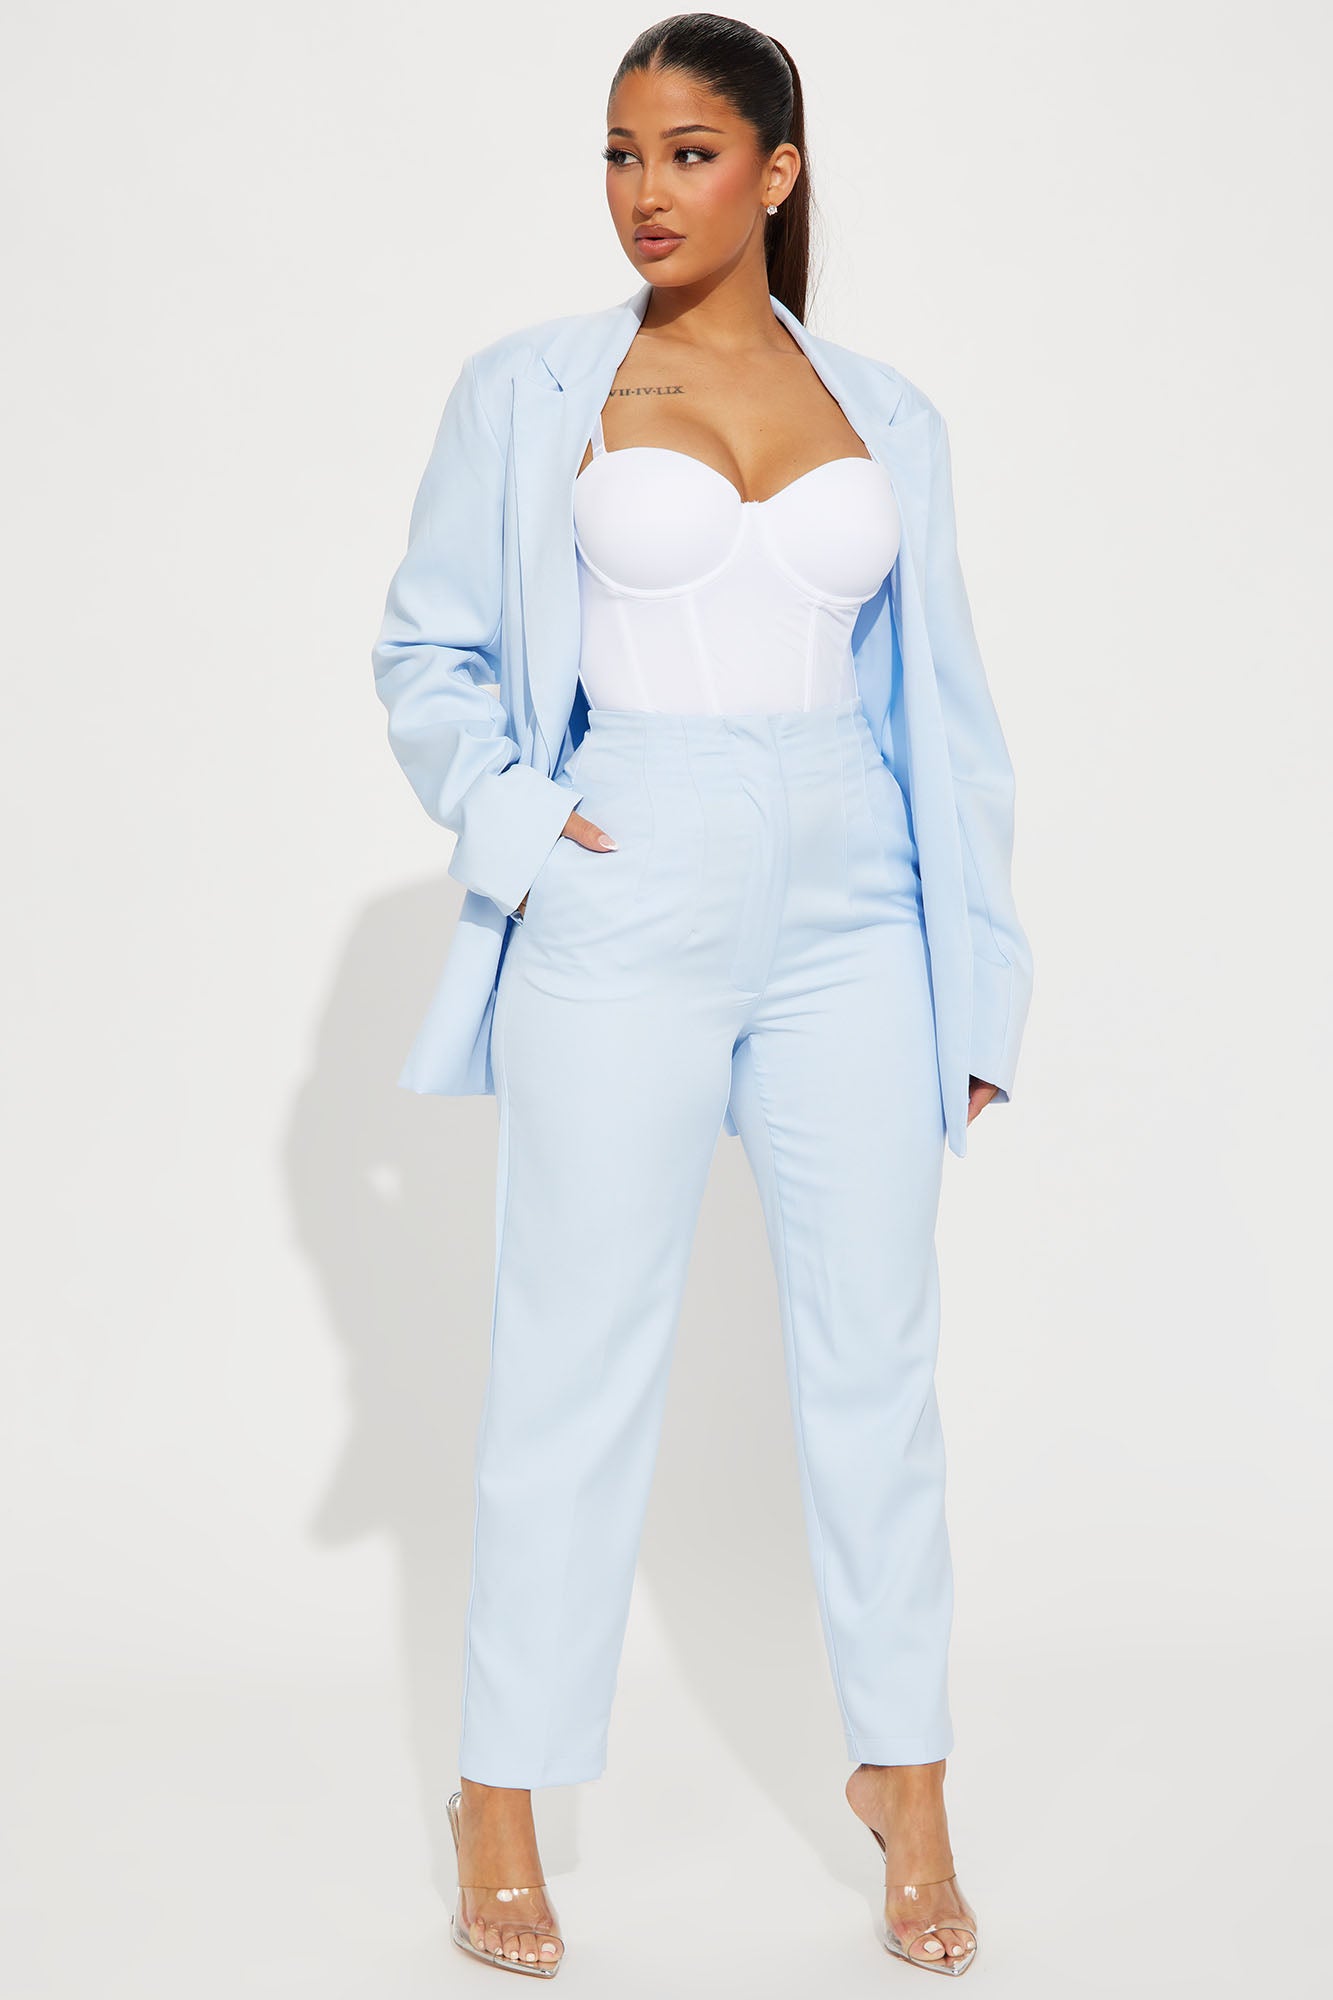 Into The Office Pant Set - Light Blue